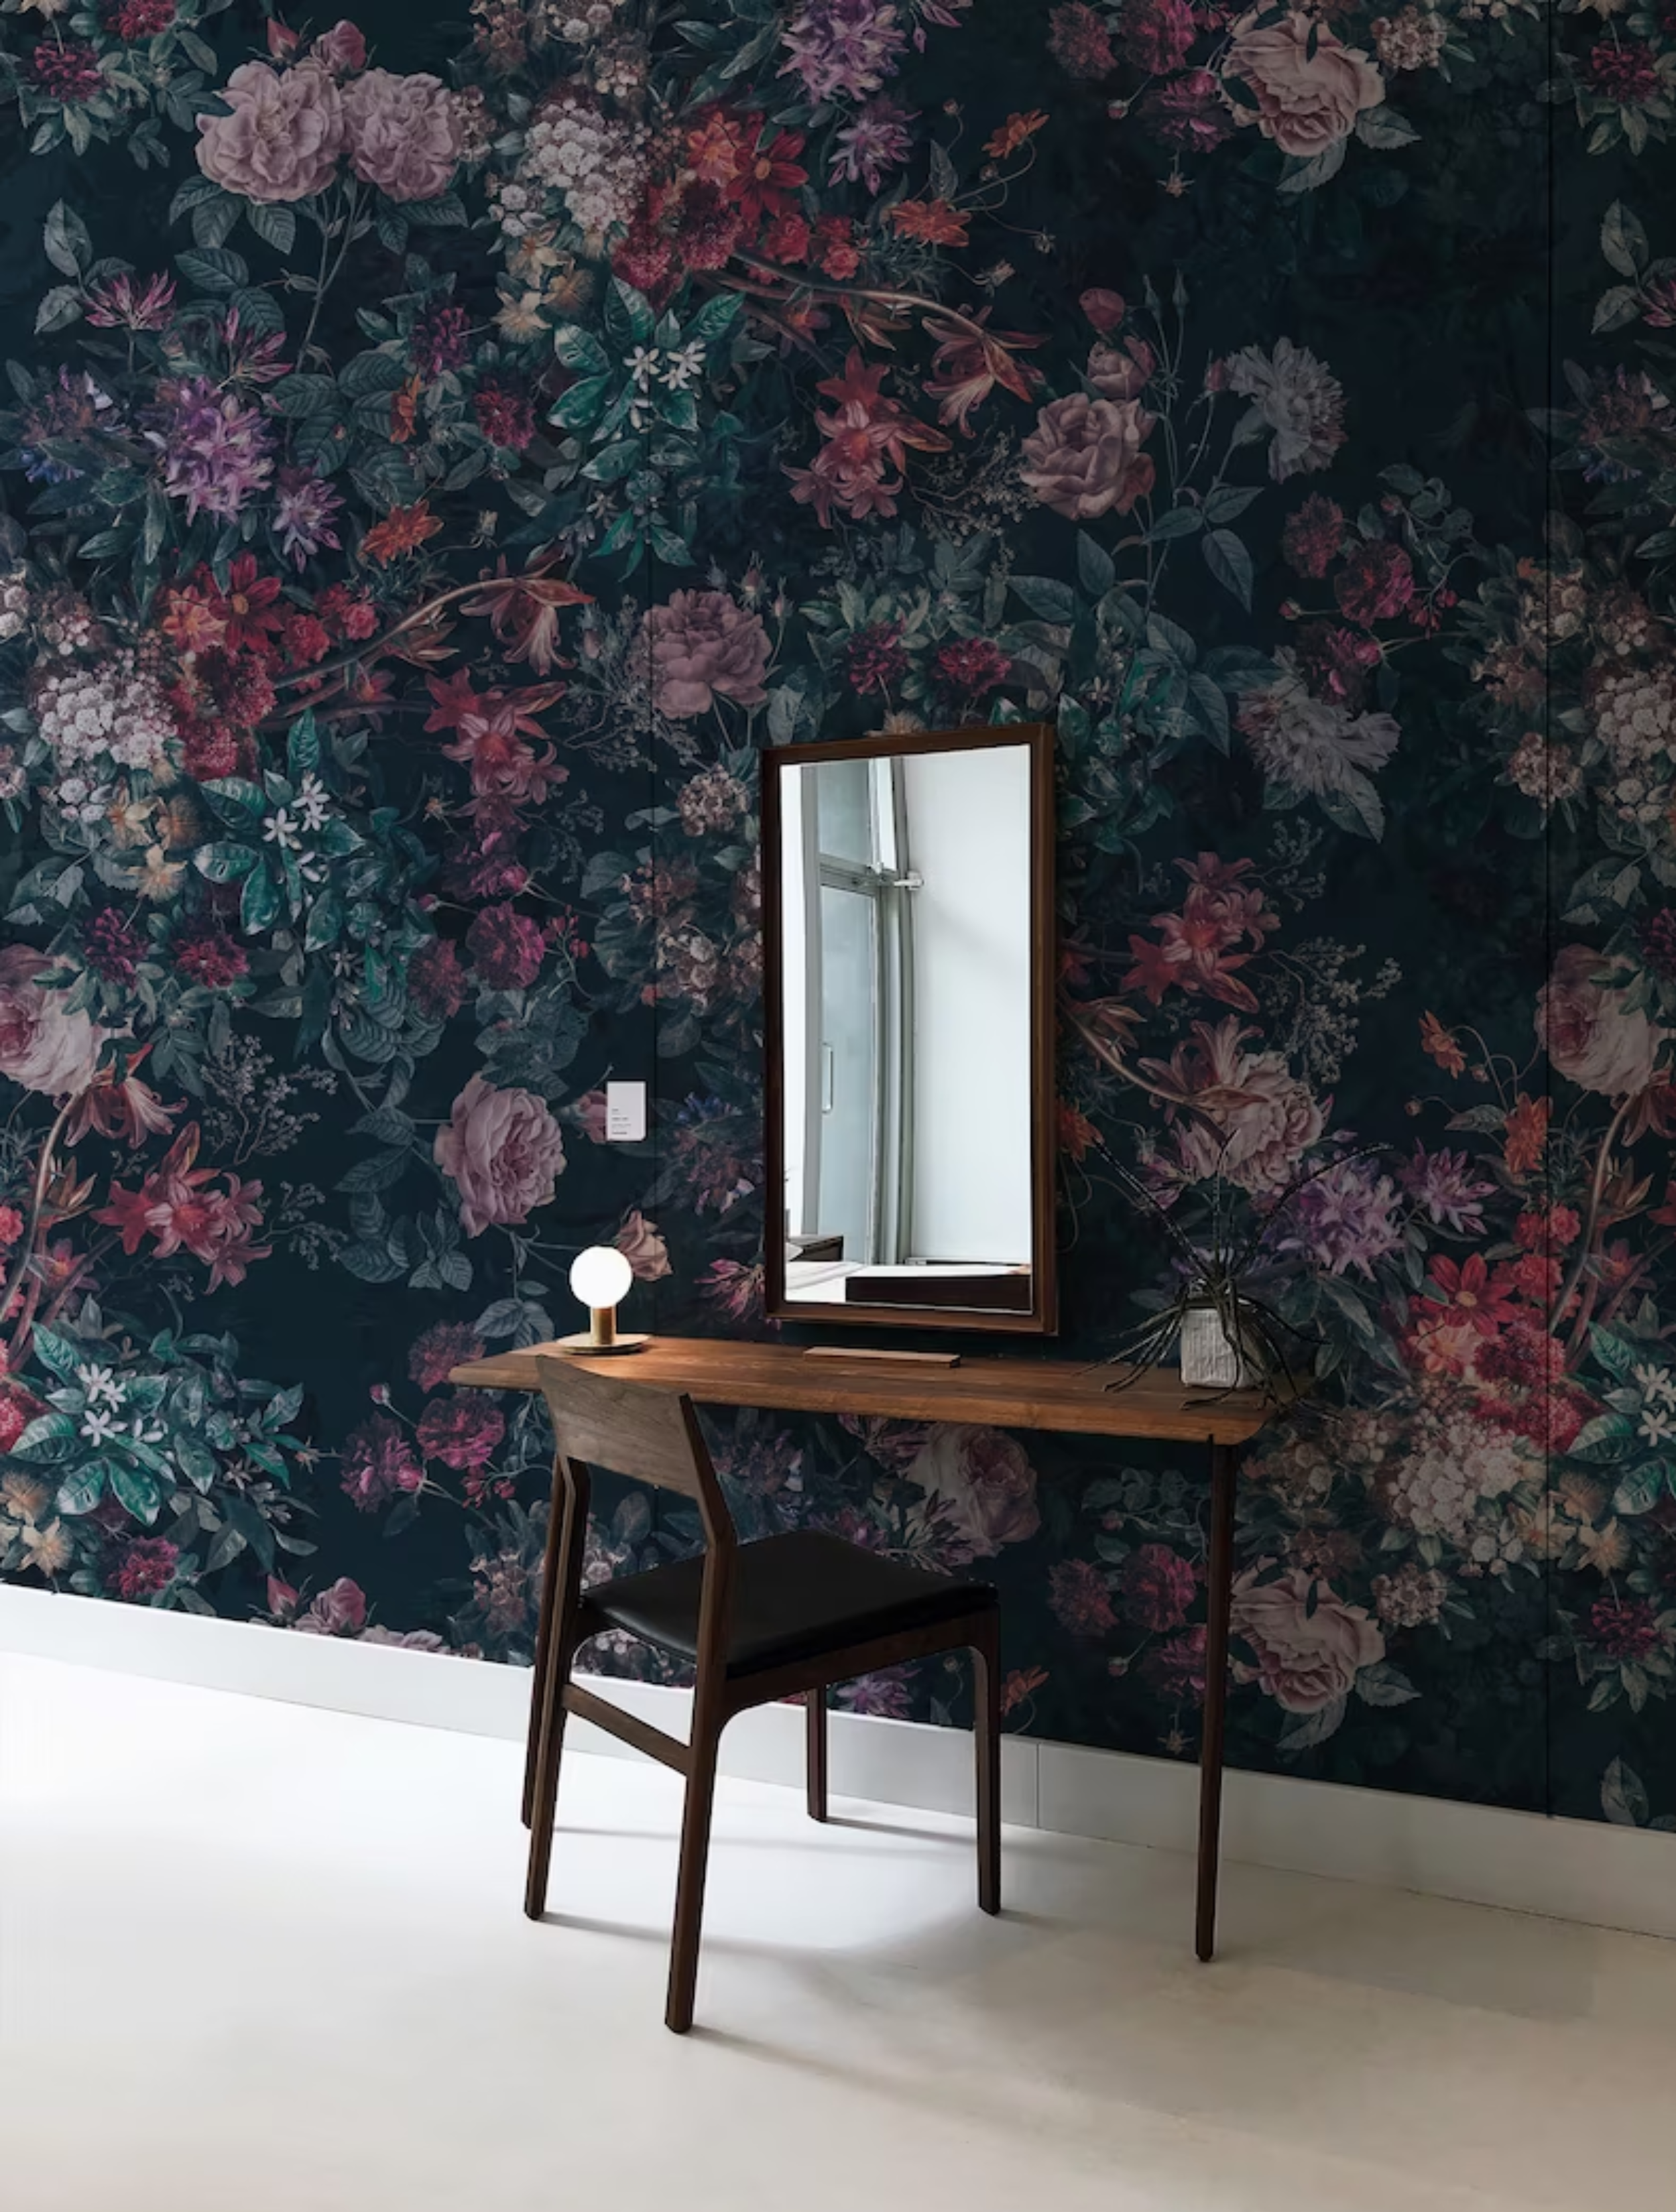 A stylish entryway is enhanced by the Dark Luxury Floral Wallpaper - Large, featuring bold floral patterns in rich hues on a dark backdrop, complemented by a sleek wooden console table, a classic mirror, and minimalistic decor, creating an ambiance of sophisticated allure.